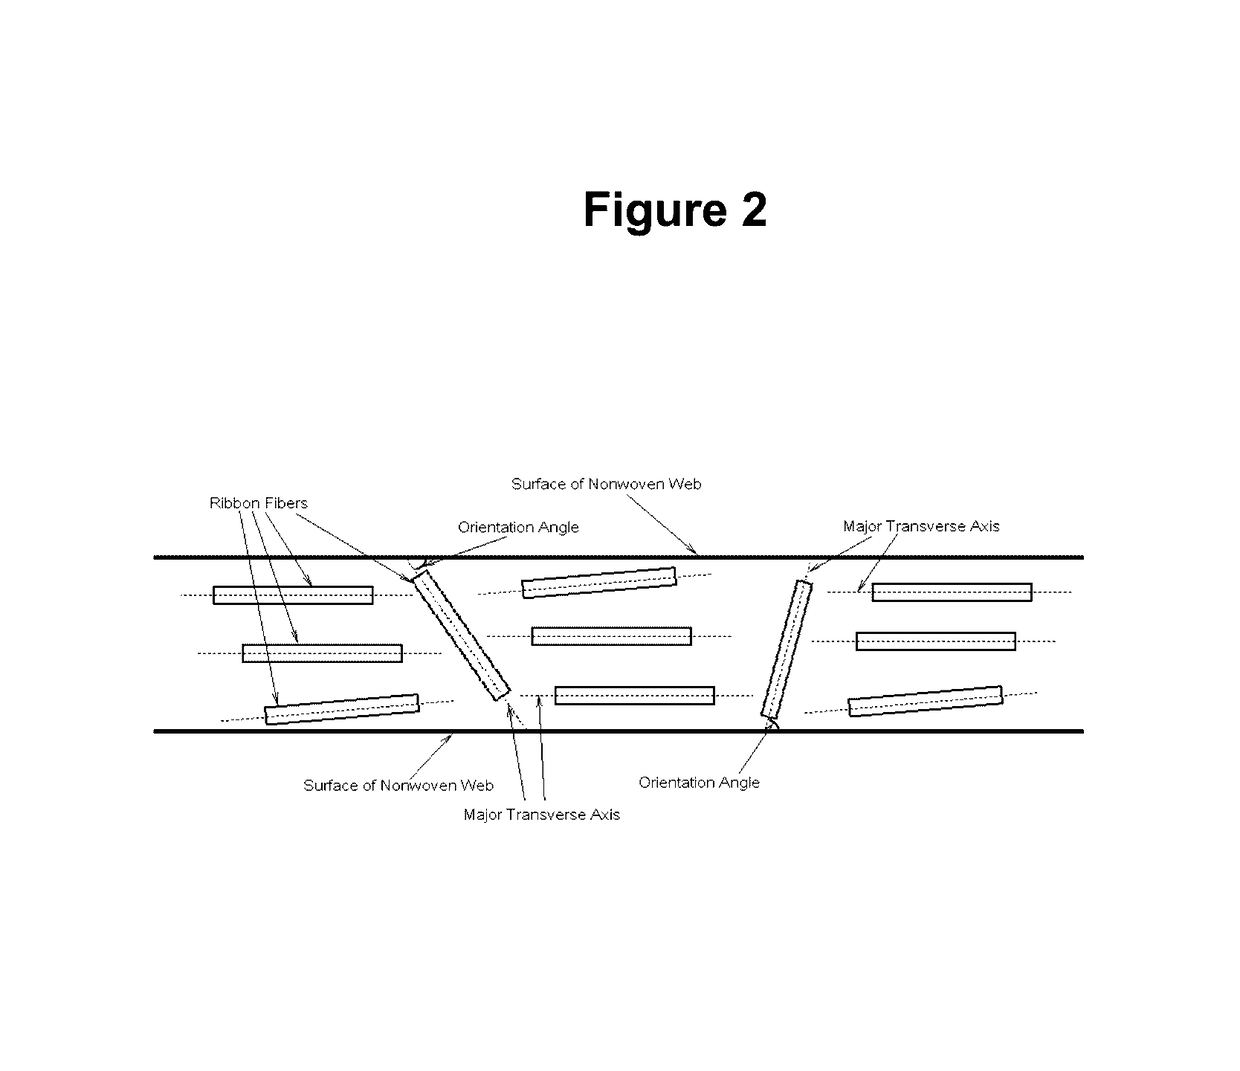 Process for making paper and nonwoven articles comprising synthetic microfiber binders